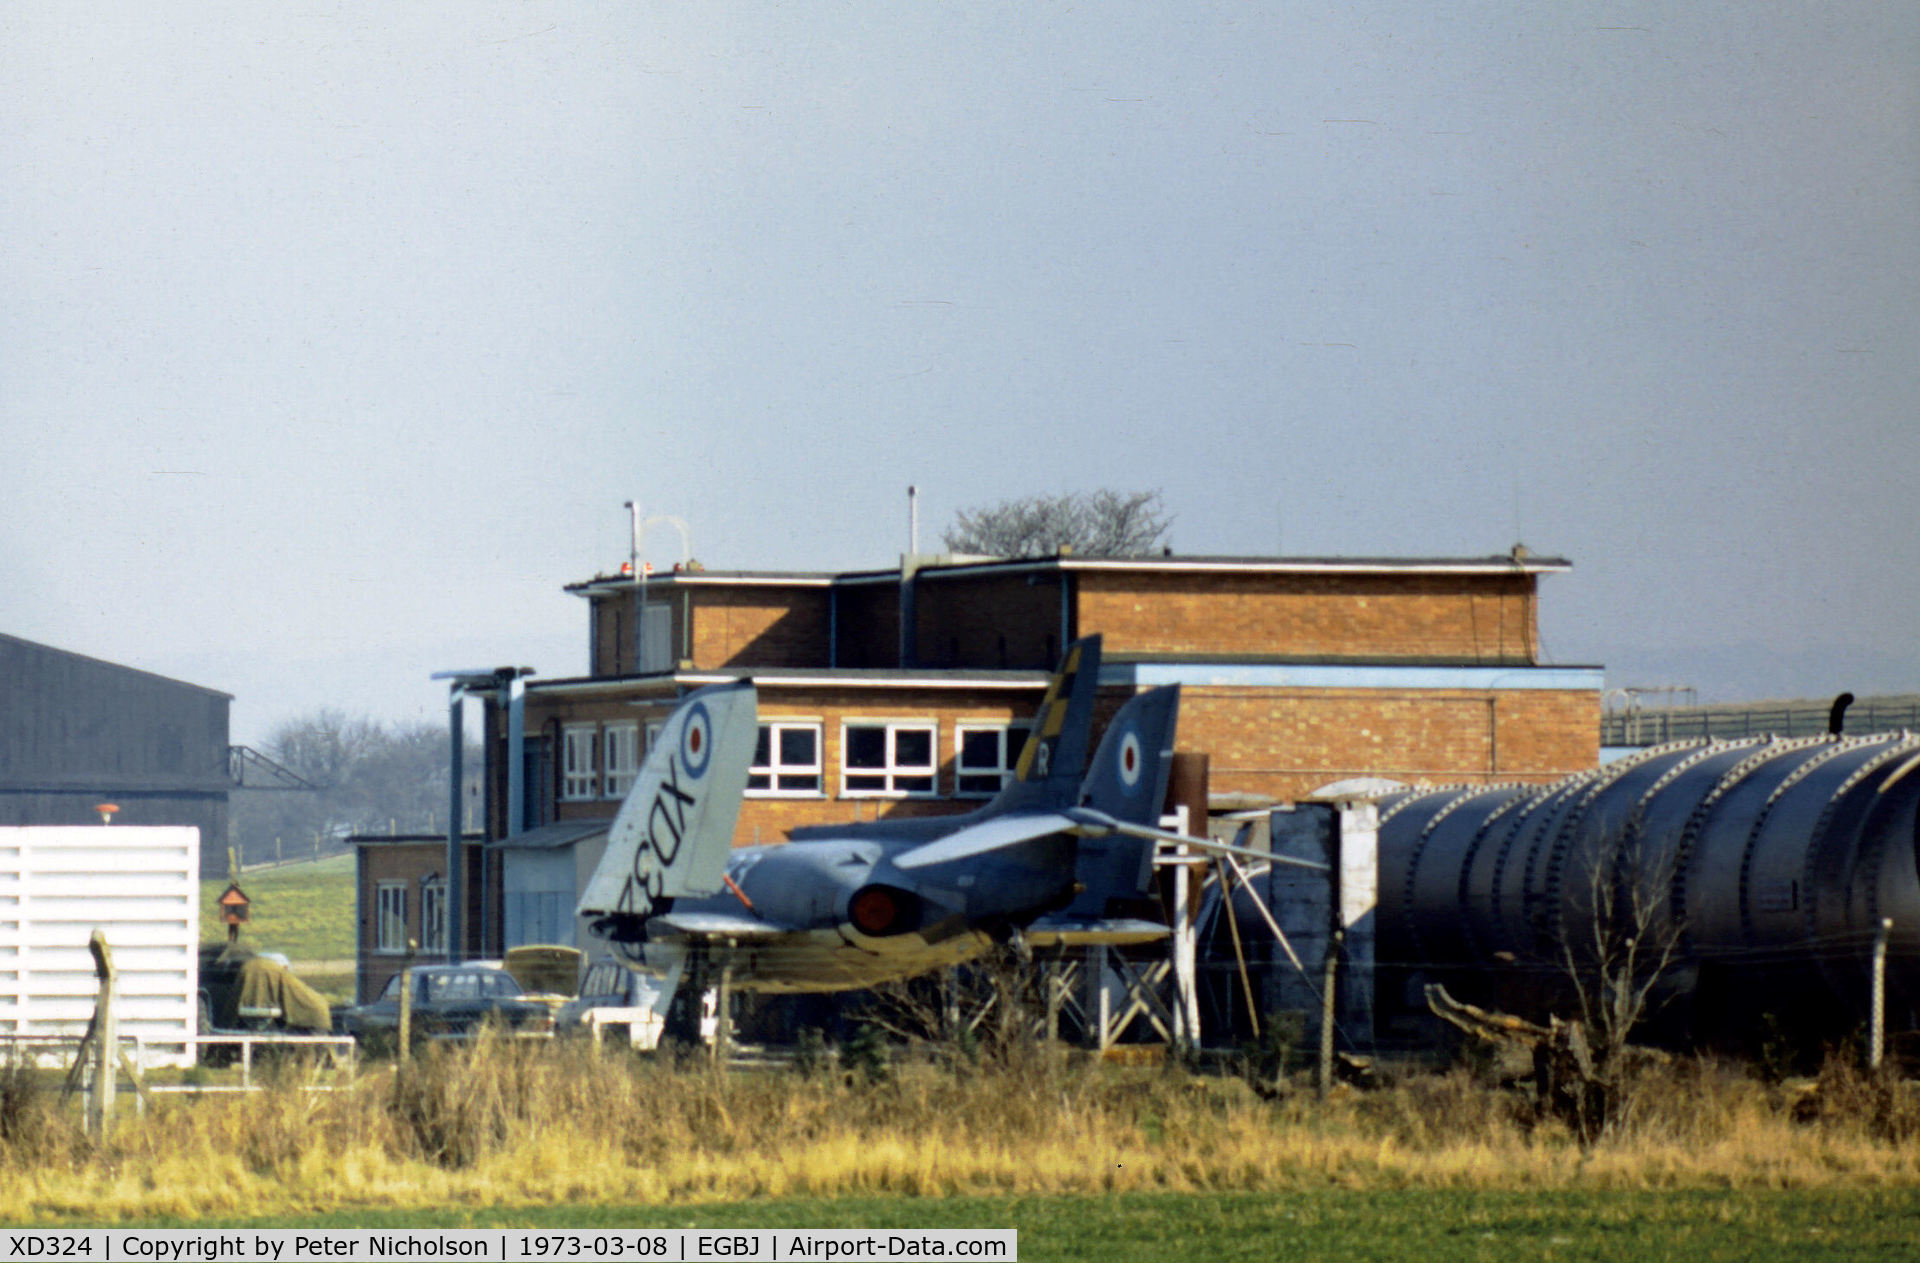 XD324, 1960 Supermarine Scimitar F.1 C/N Not found XD324, Scimitar F.1 of 803 Squadron with Dowty Rotol at Staverton in the Summer of 1973 for evaluation of fuel systems for the Multi-Role Combat Aircraft MRCA which evolved into the Panavia Tornado.